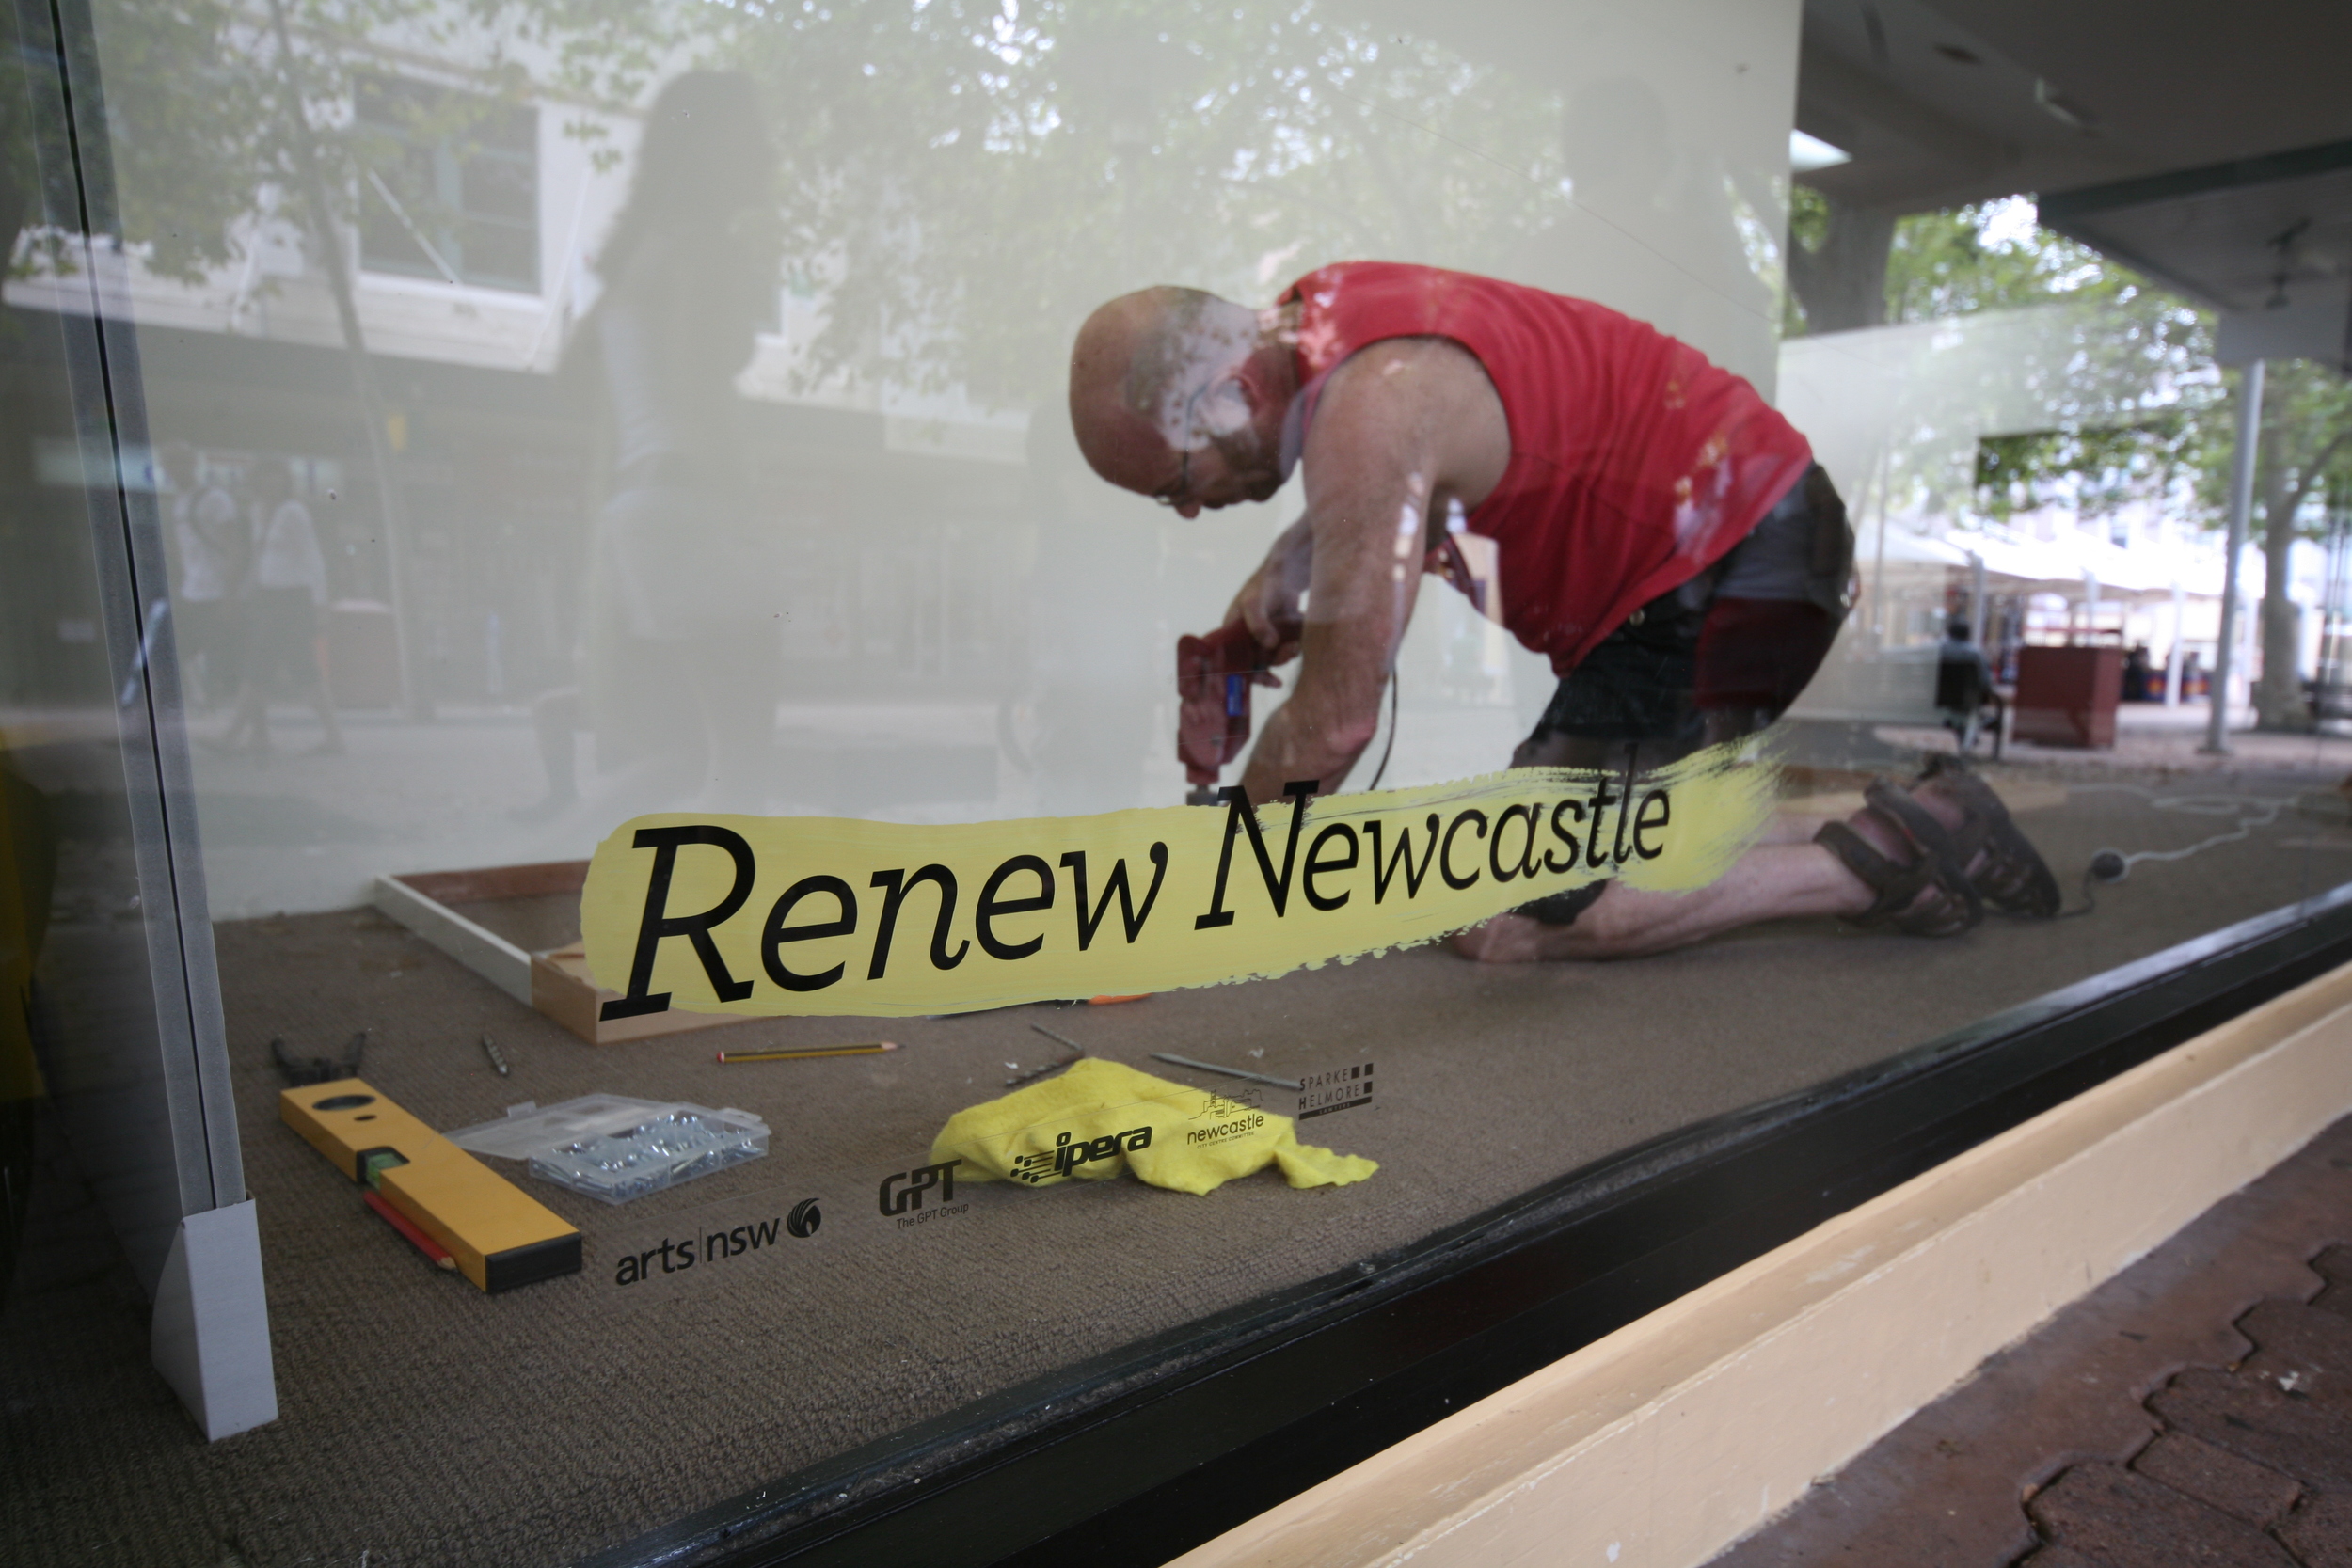 A gallery documenting Newcastle's transformation. Images courtesy of Renew Newcastle.